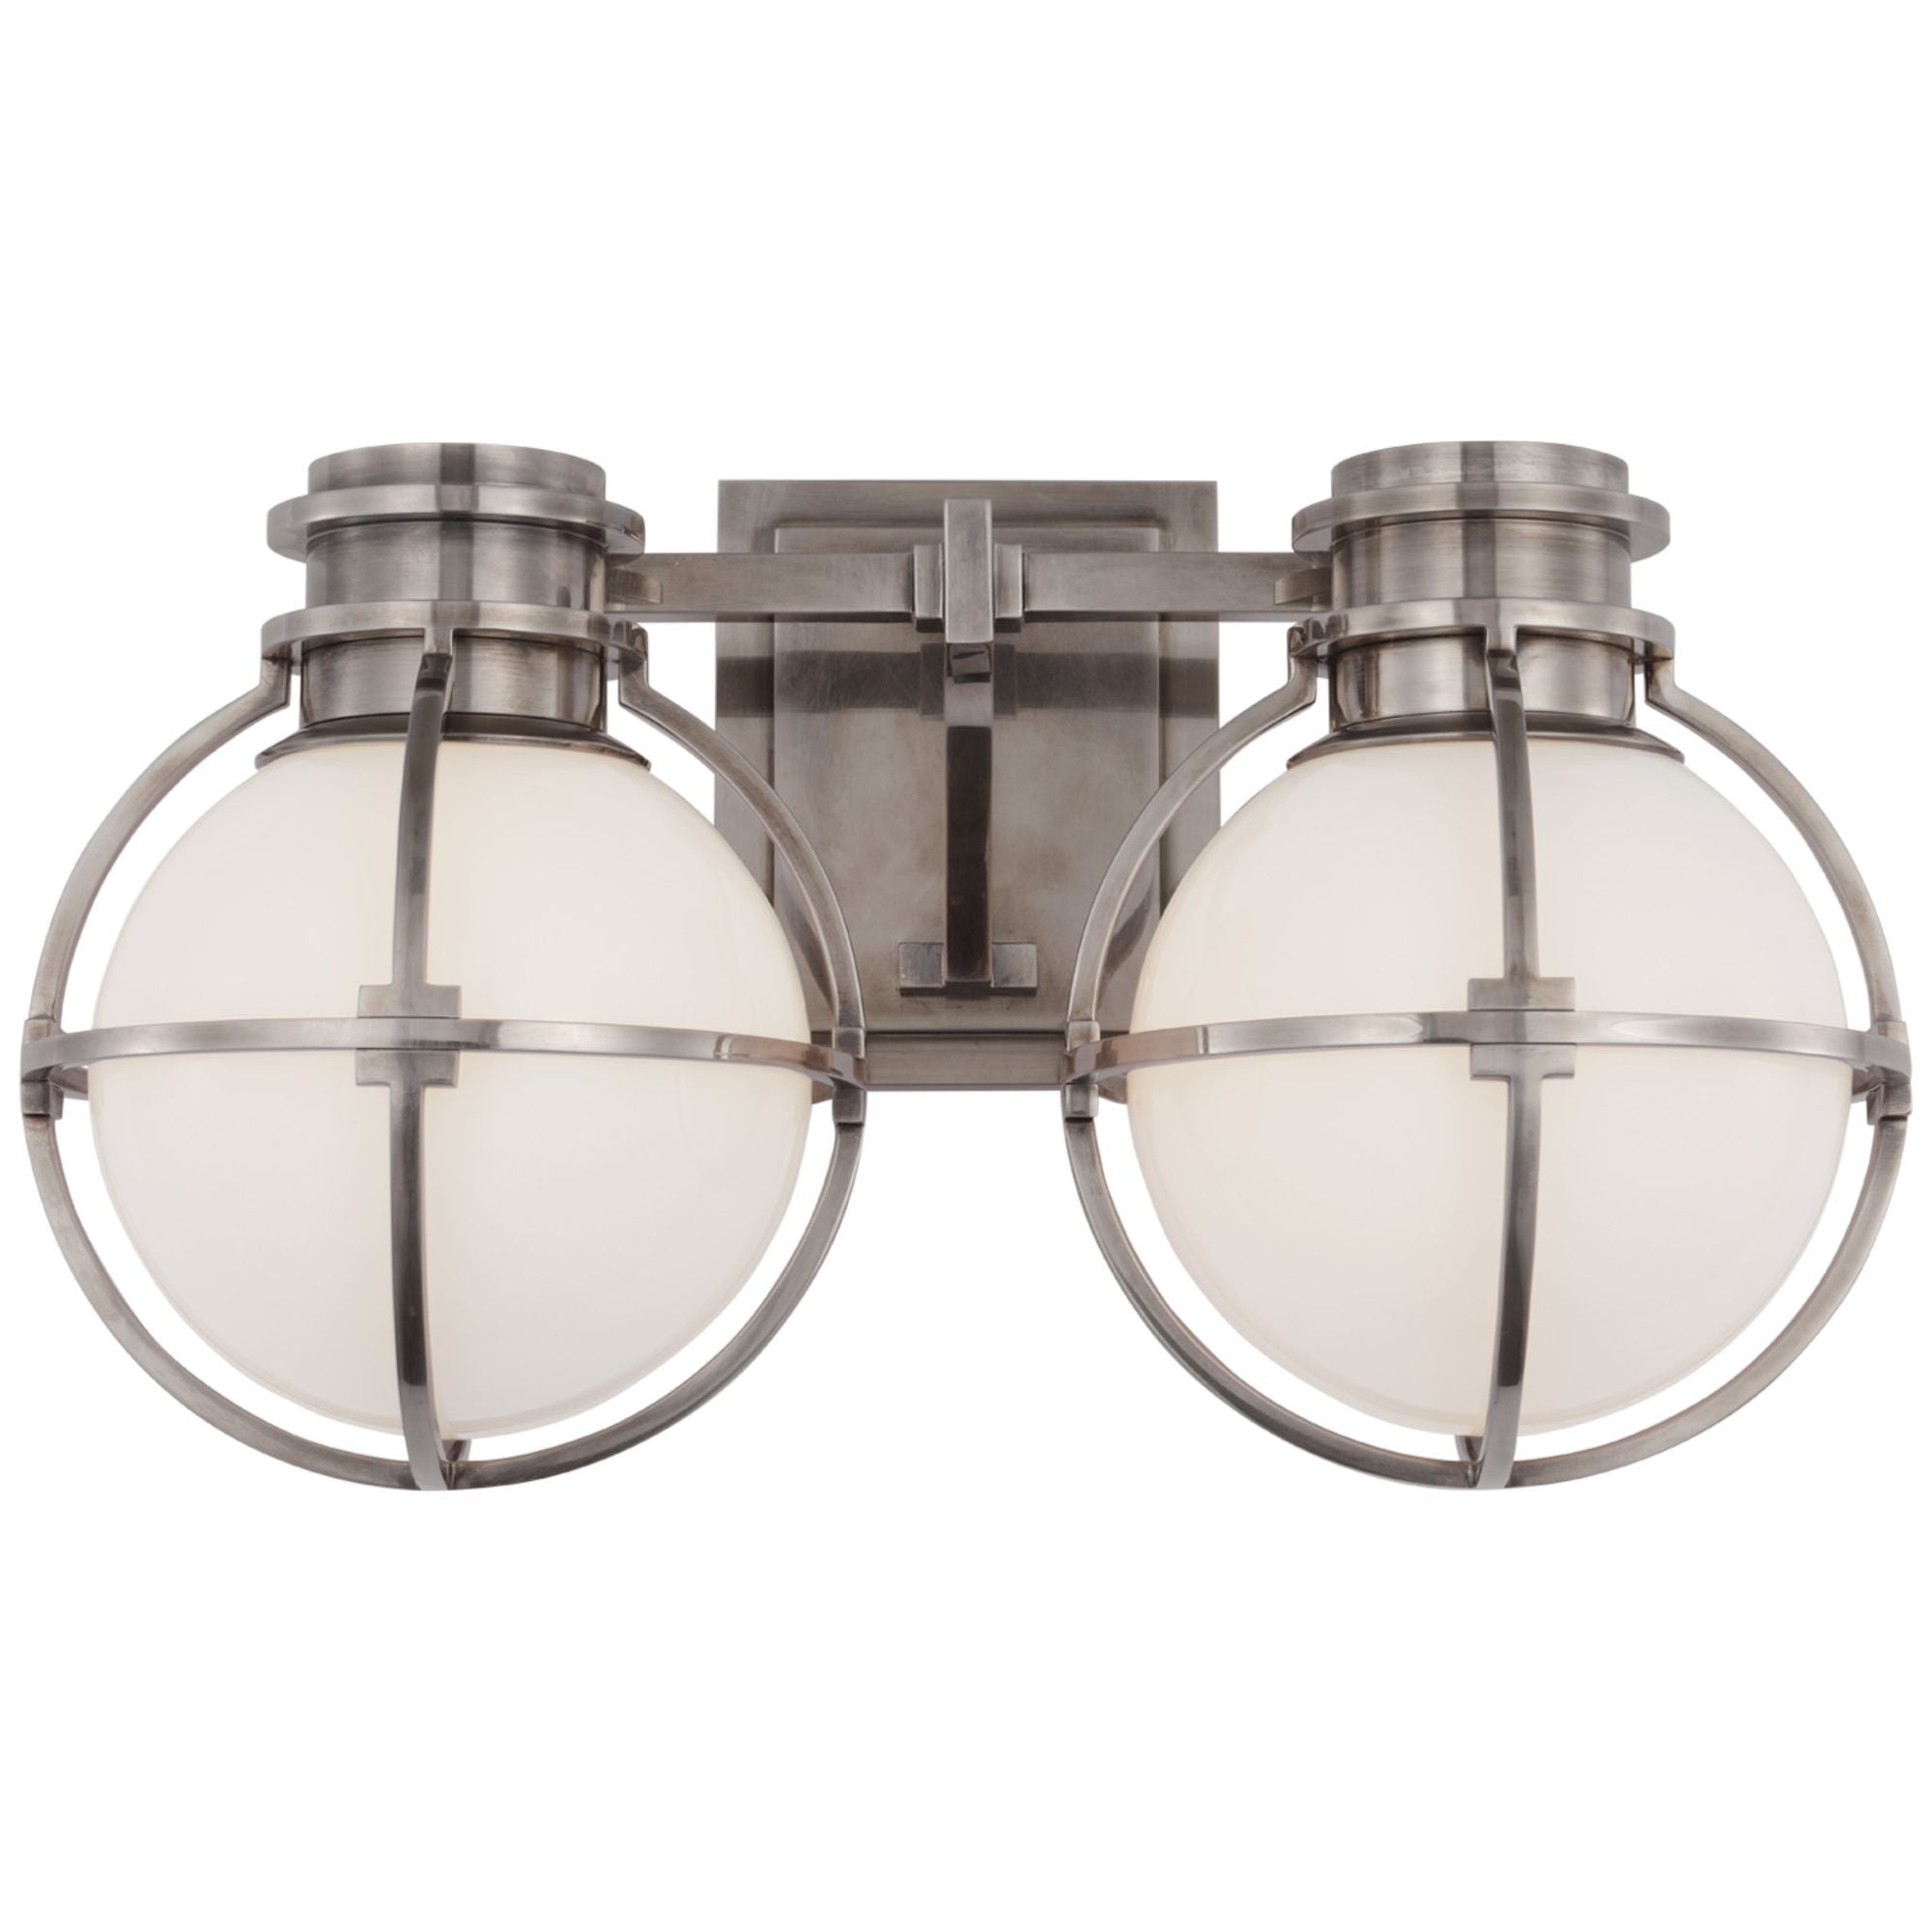 Chapman & Myers Gracie Double Sconce in Antique Nickel with White Glass